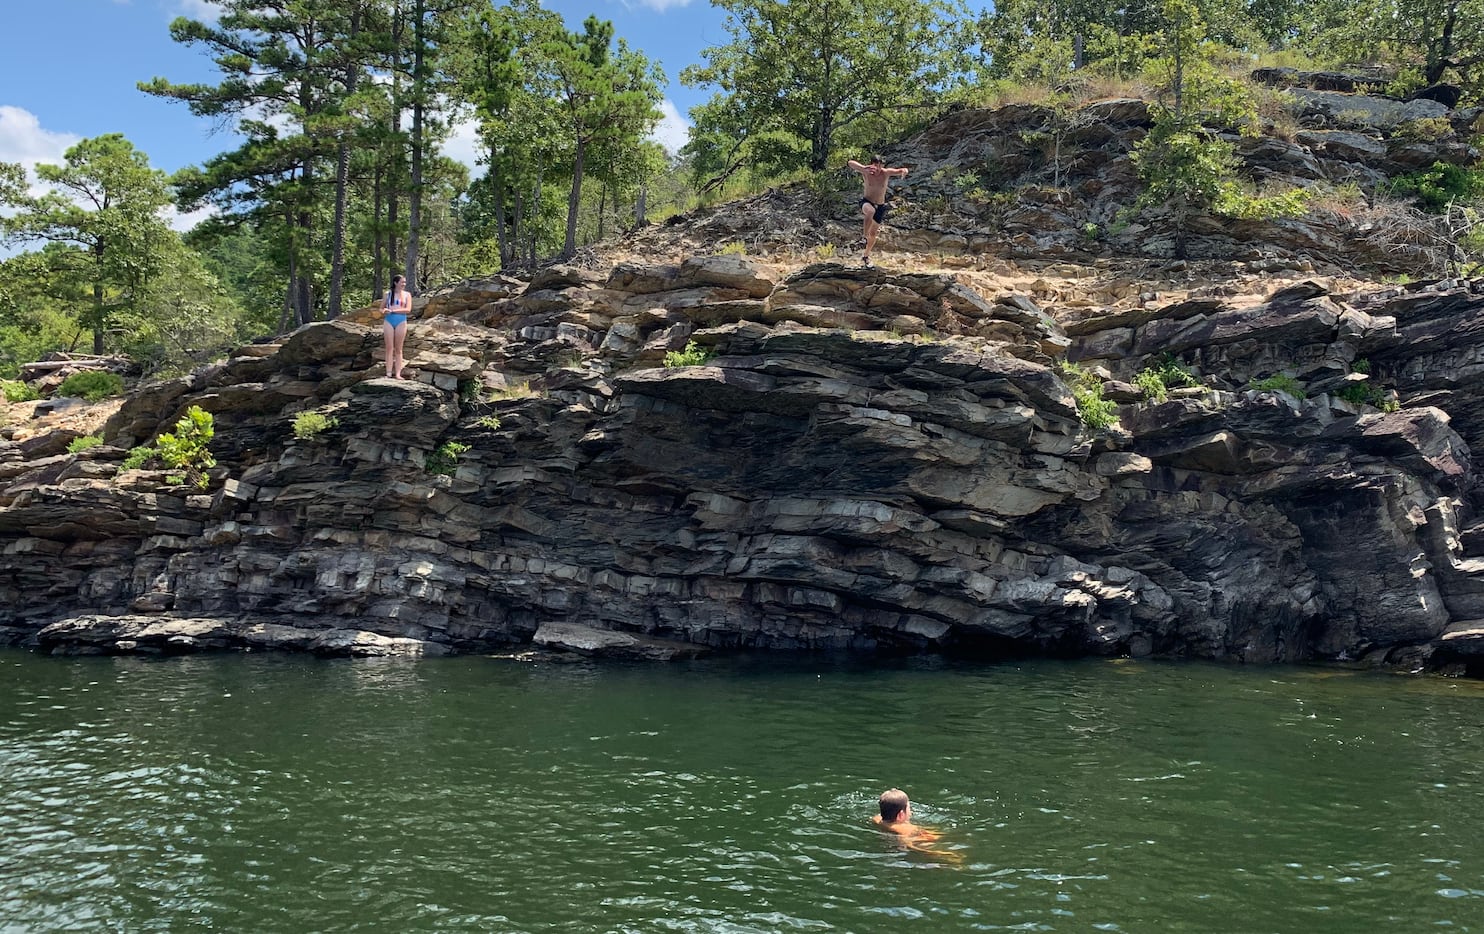 Cooper Damm went cliff-diving during a recent vacation to Beavers Bend State Park.